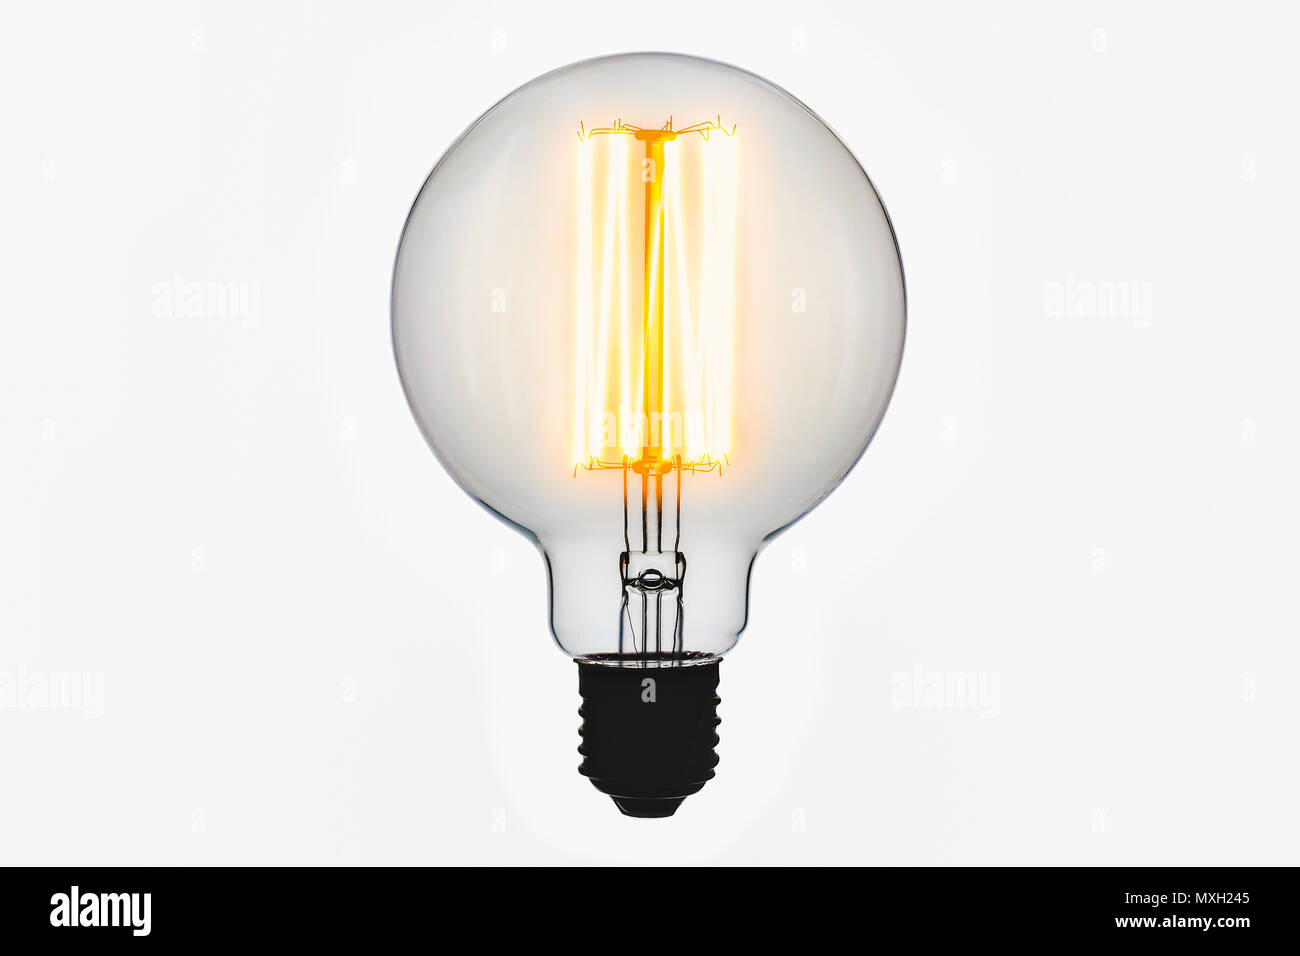 vintage electric lamp, light bulb isolate on white background. Stock Photo